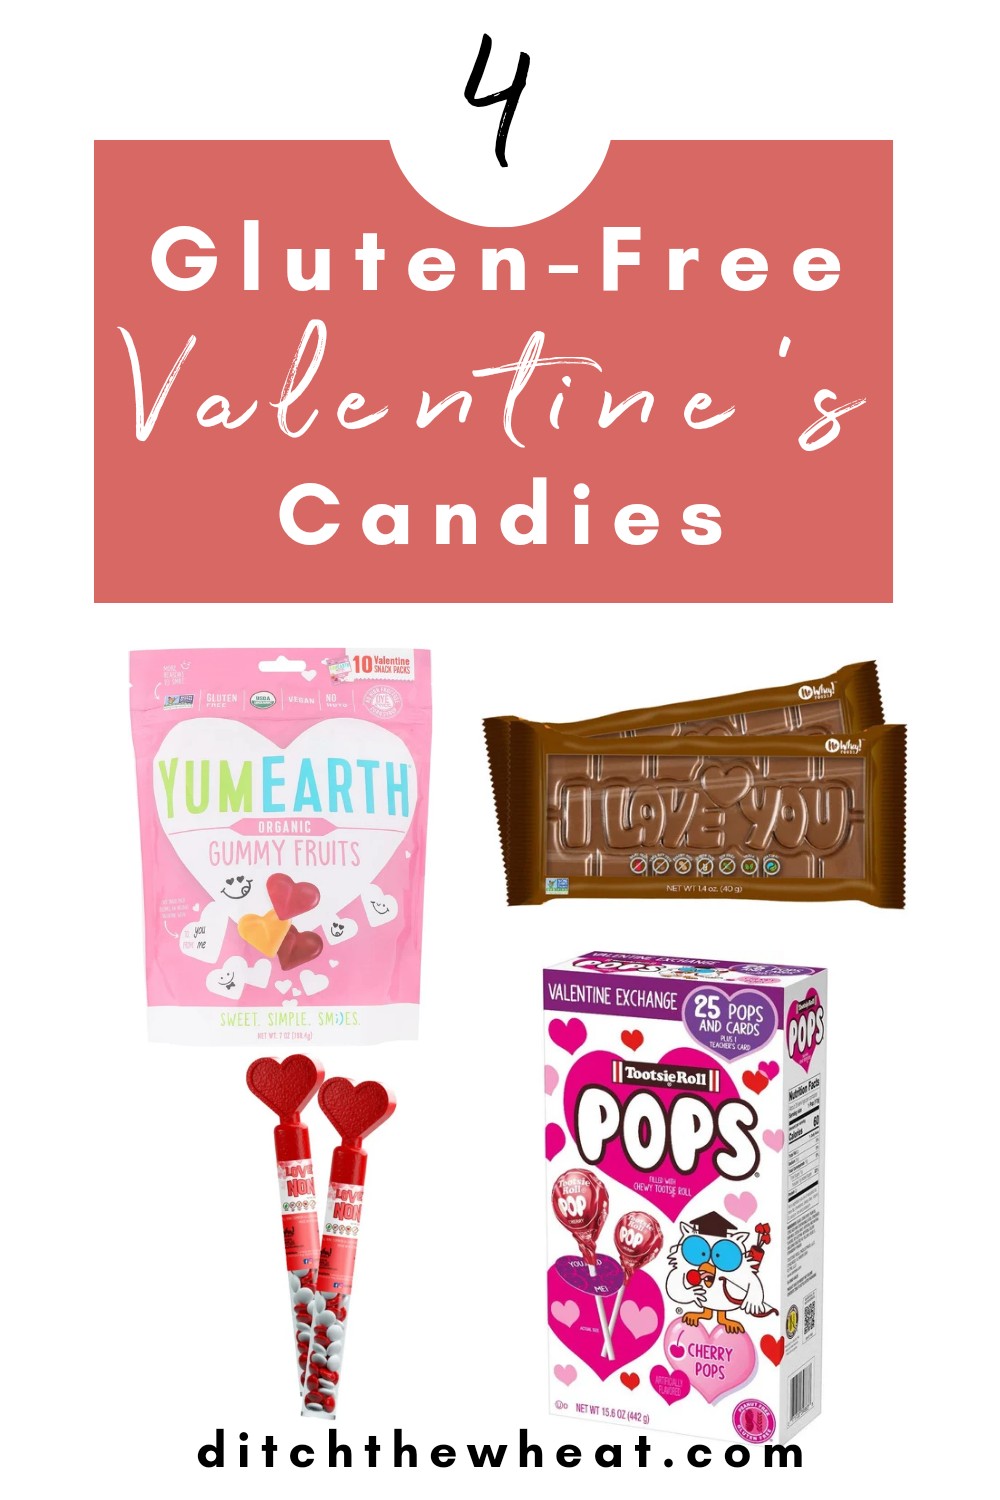 A selection of four gluten free Valentine's Day candies.